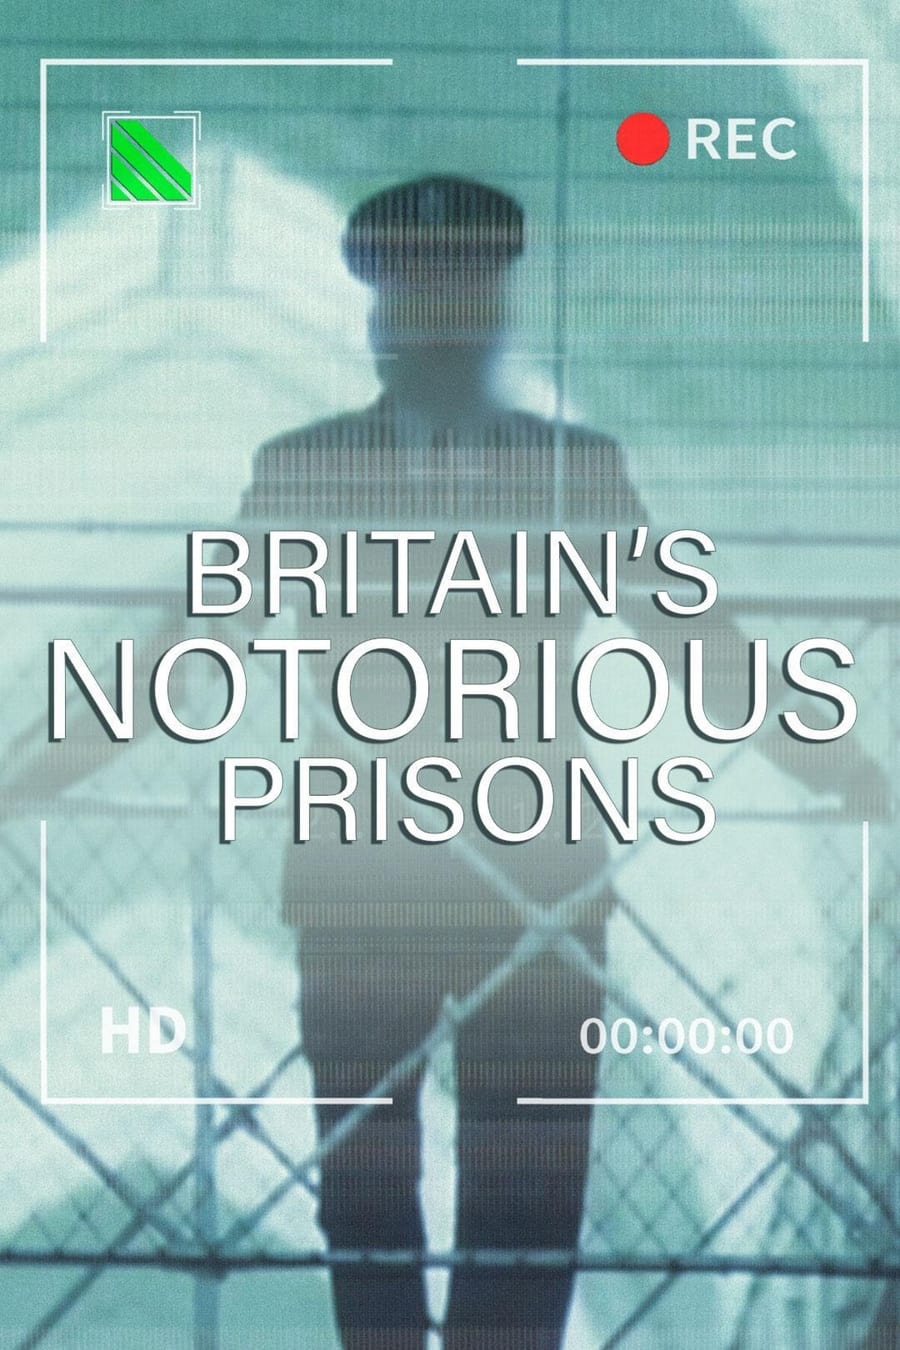 Britain's Notorious Prisons